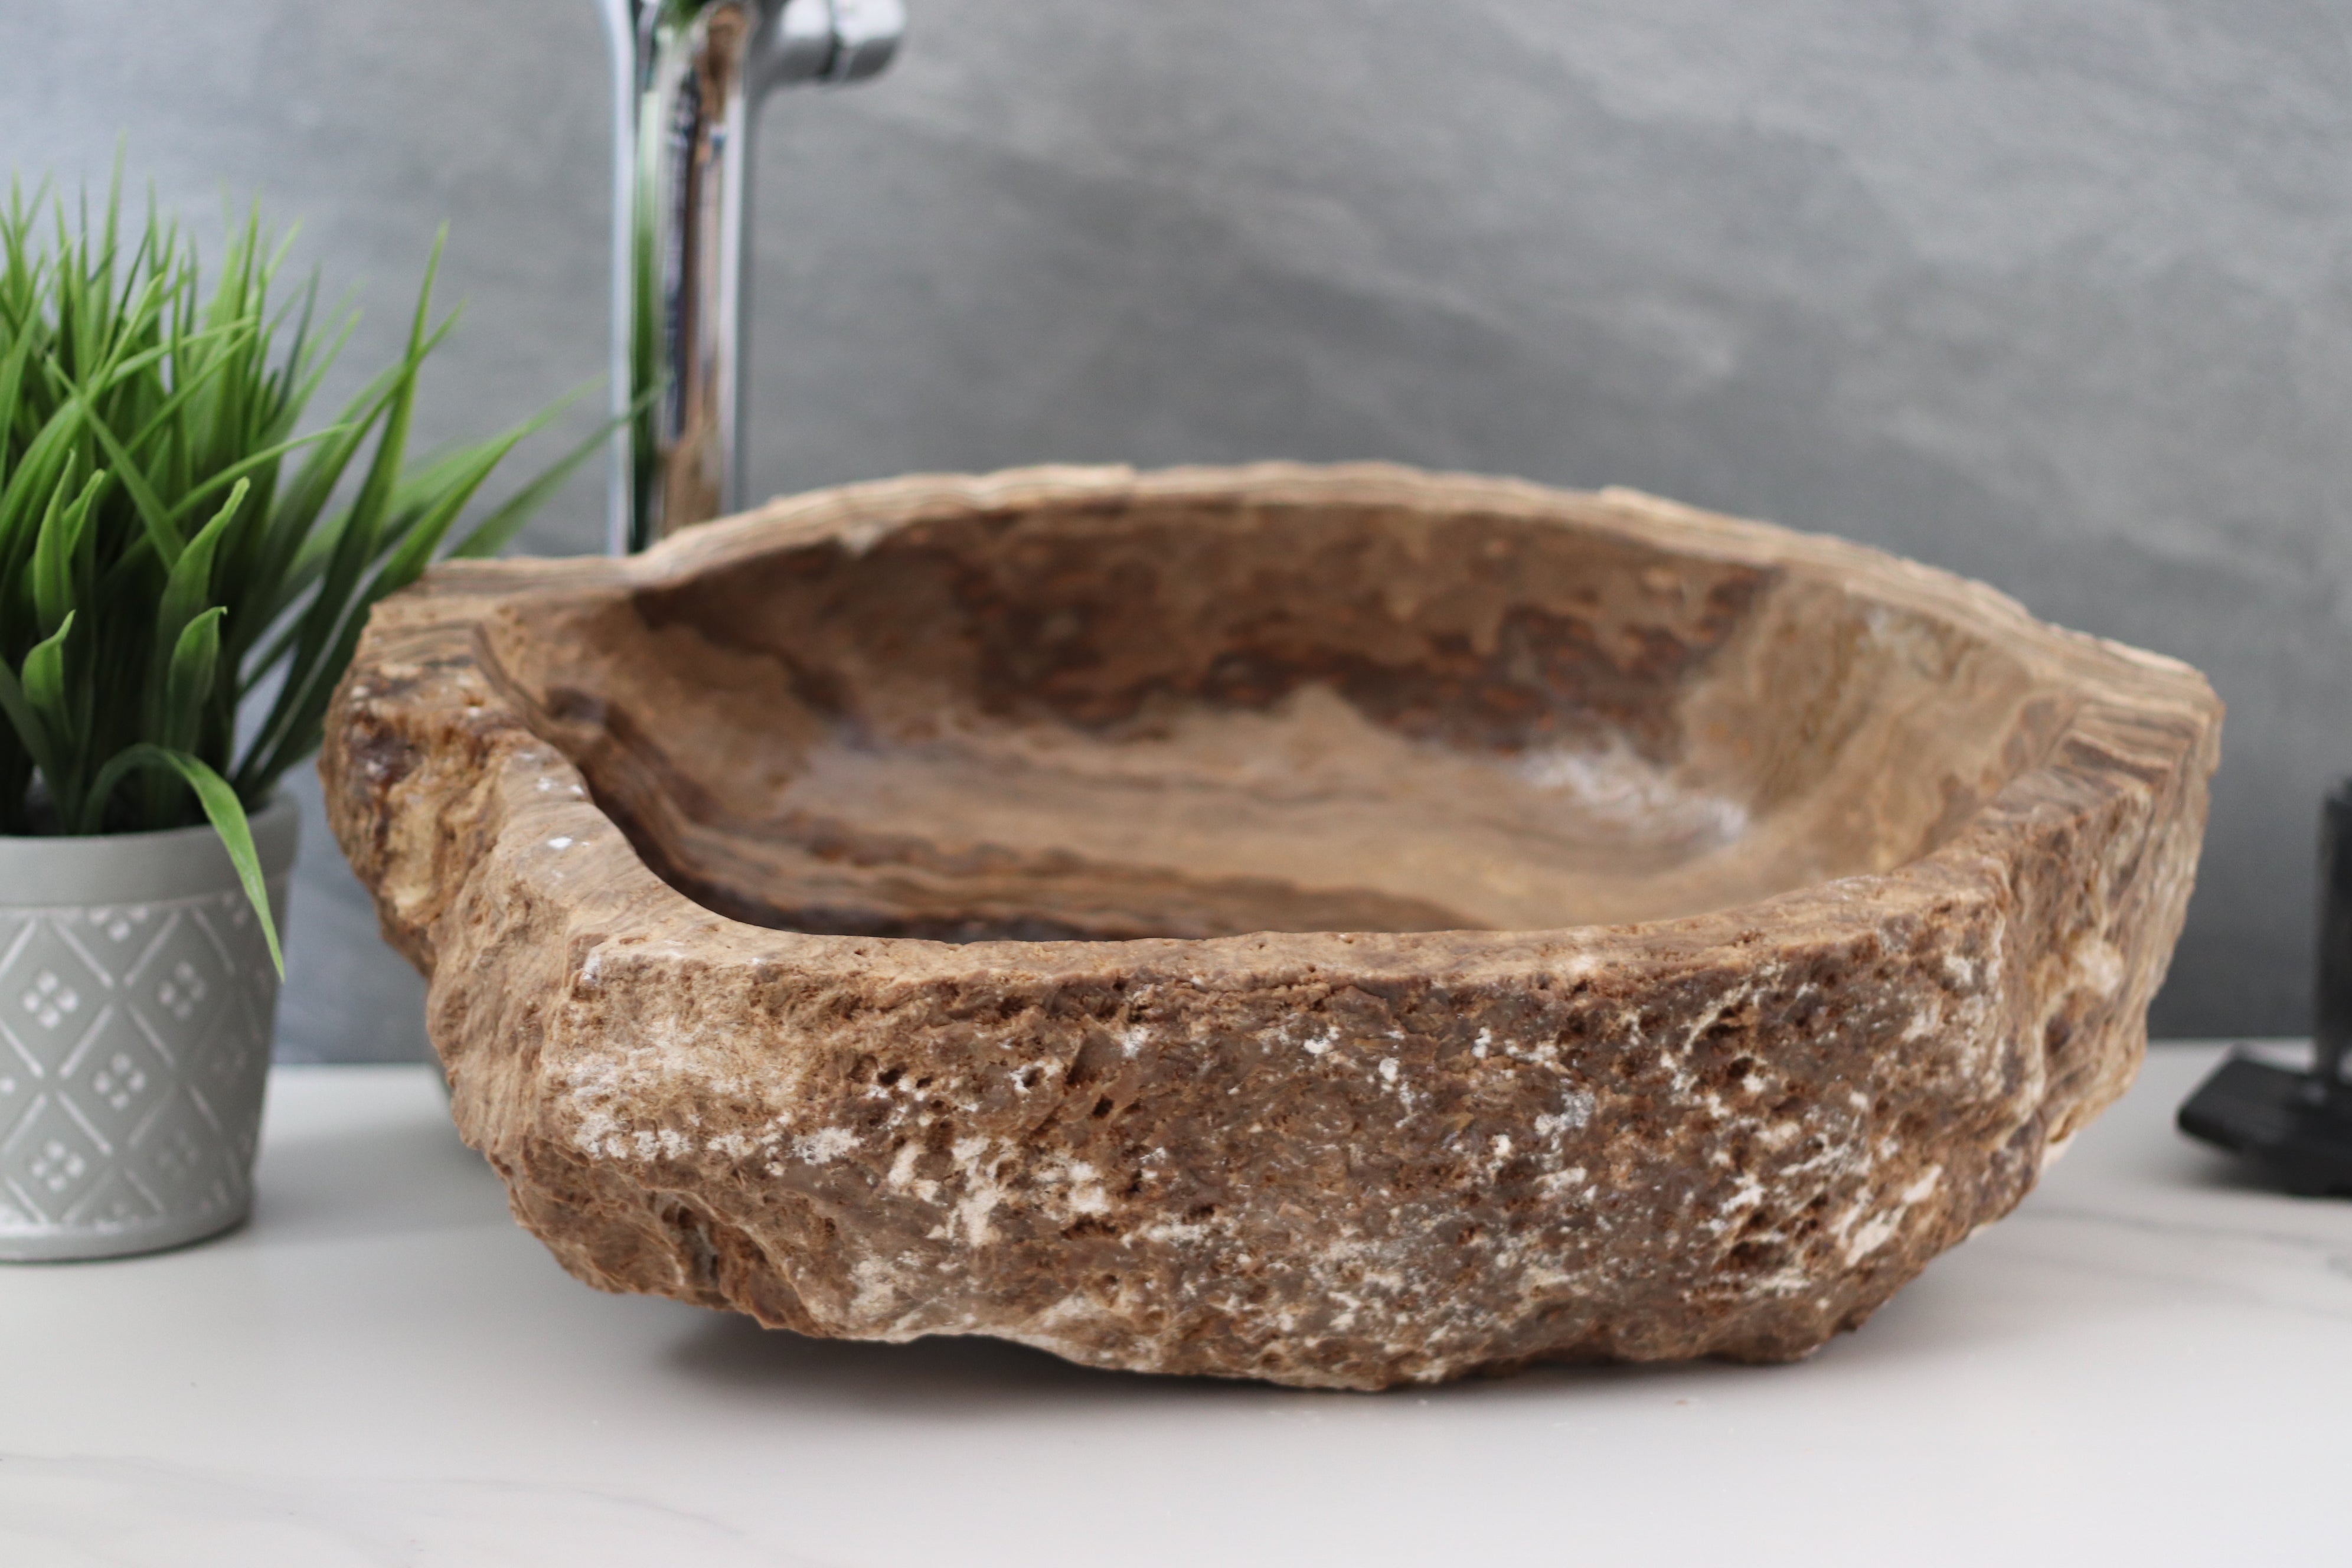 Epoxy Coated Dark Brown and Beige Onyx Vessel Sink. Handmade in Mexico. We hand finish, package, and ship from the USA. Buy now at www.felipeandgrace.com. 